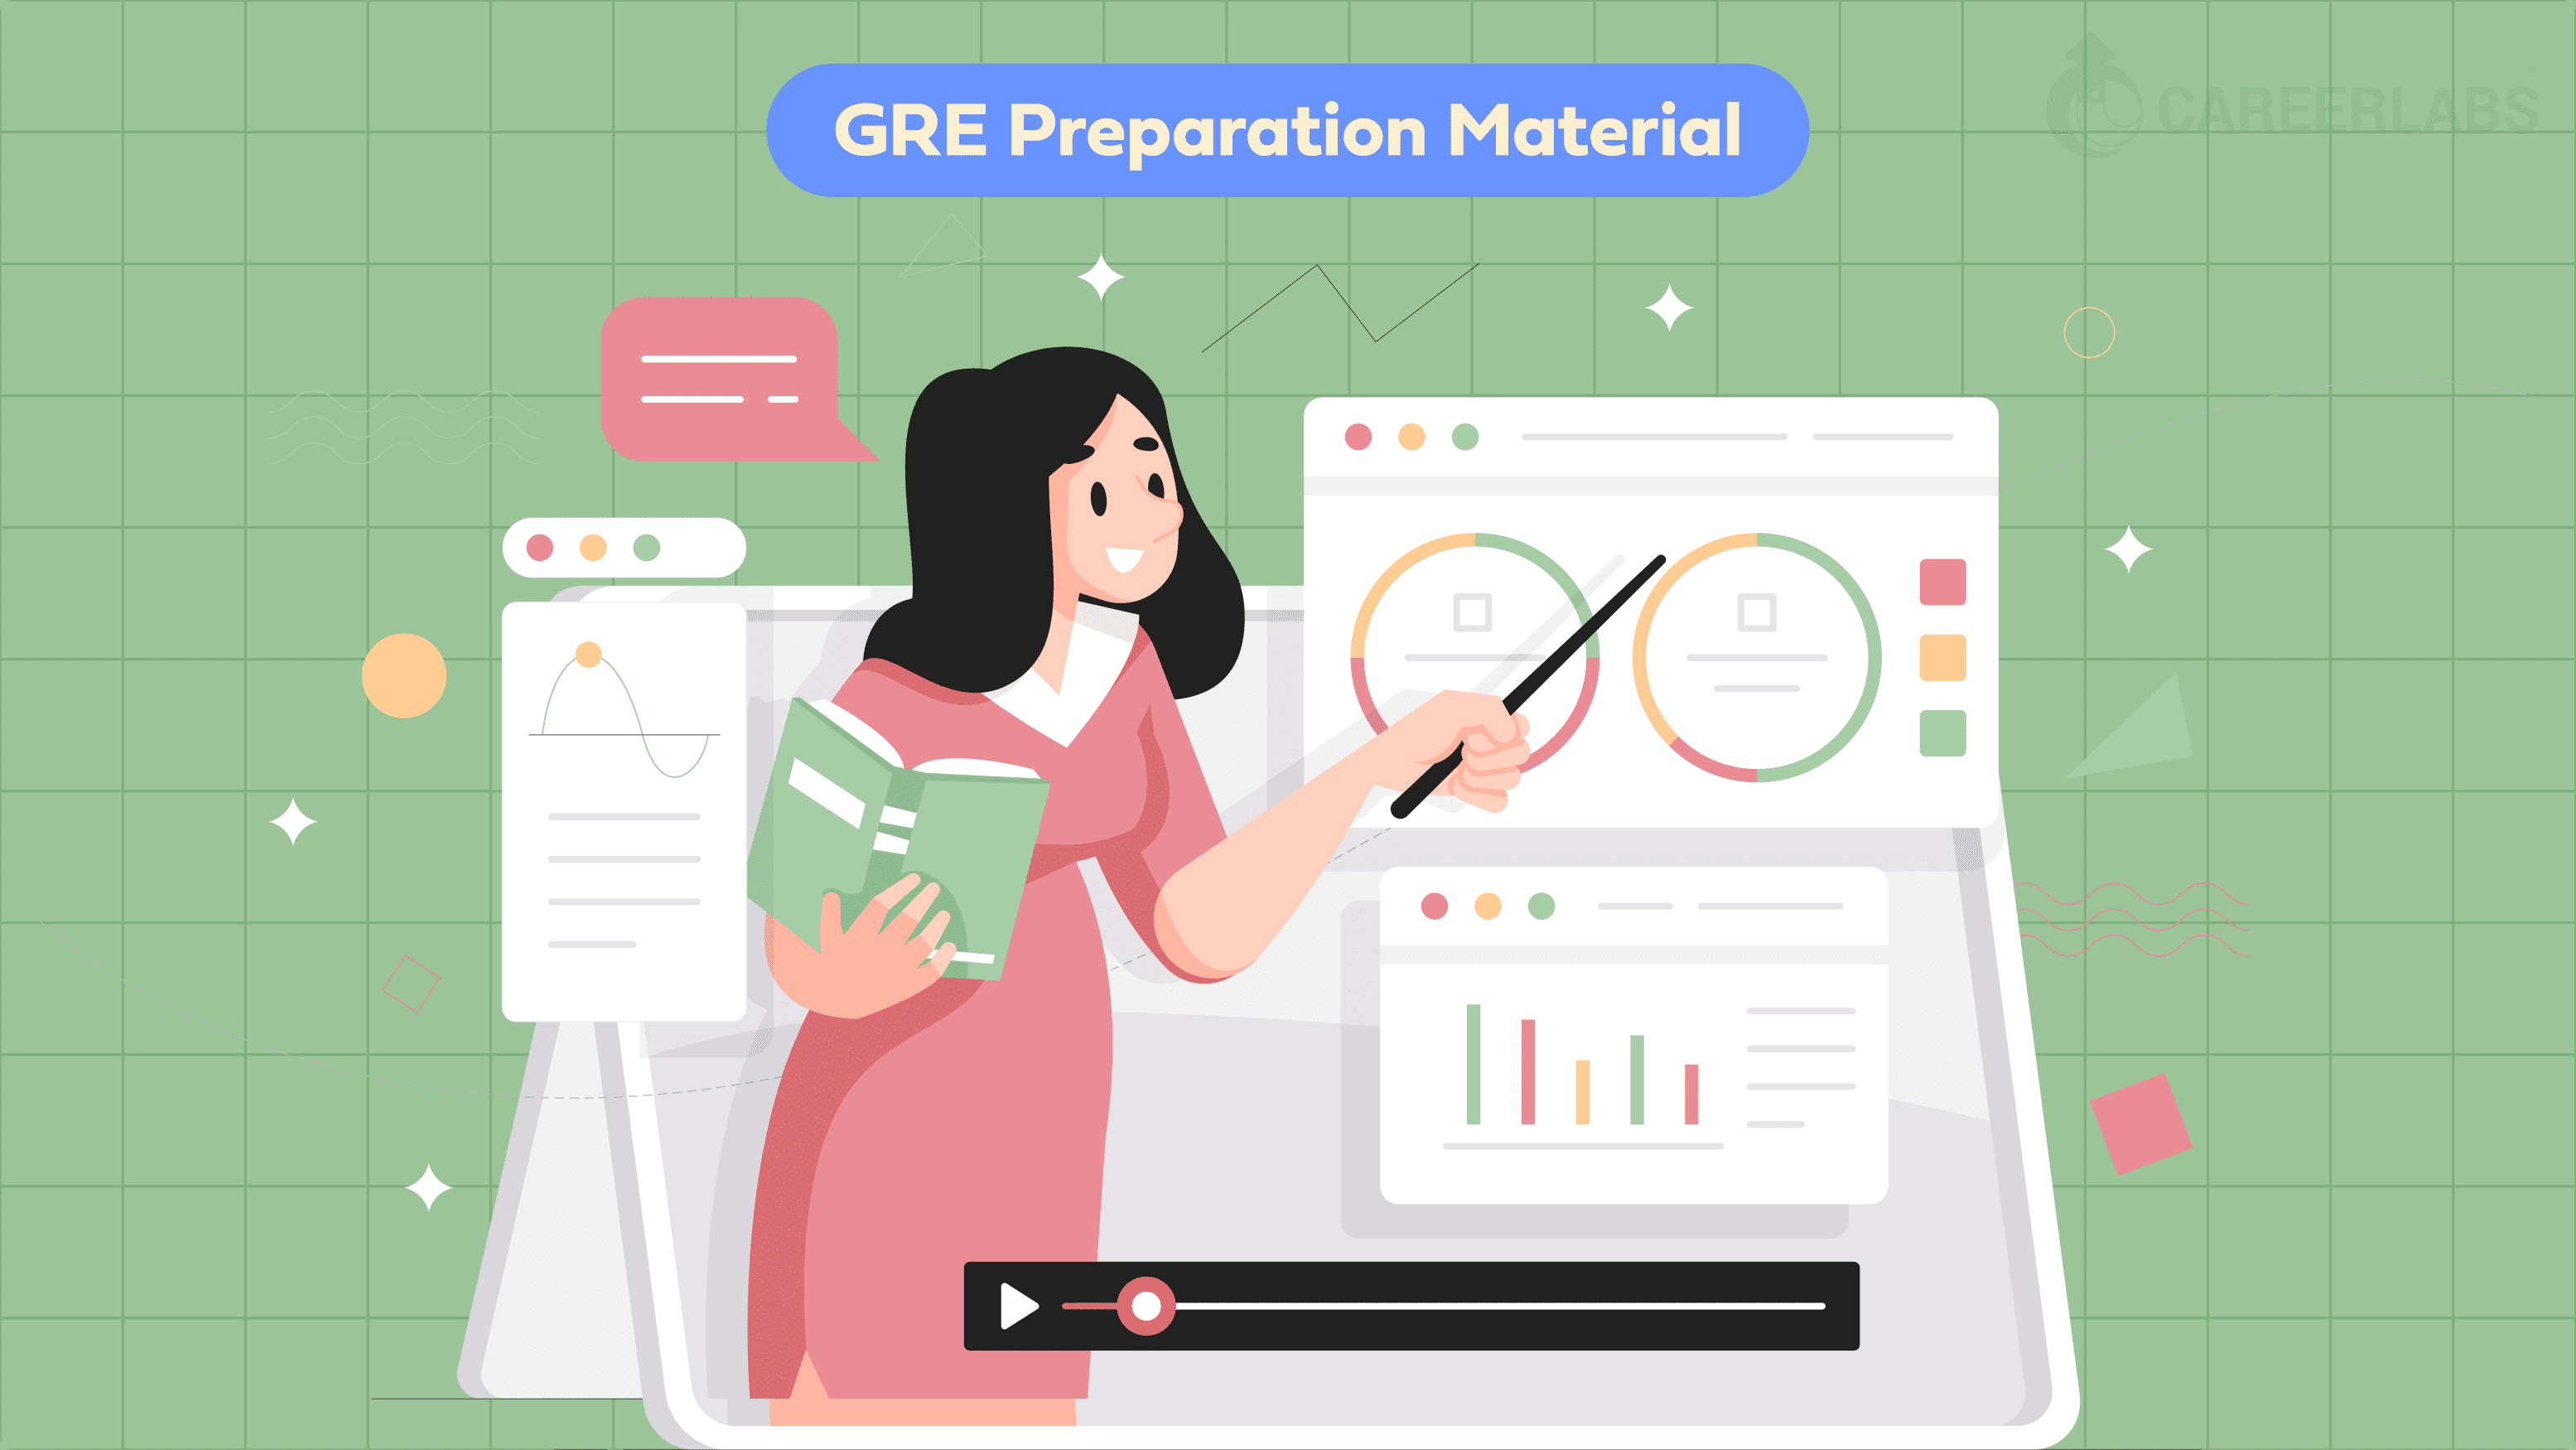 GRE Preparation Material A list of important study materials